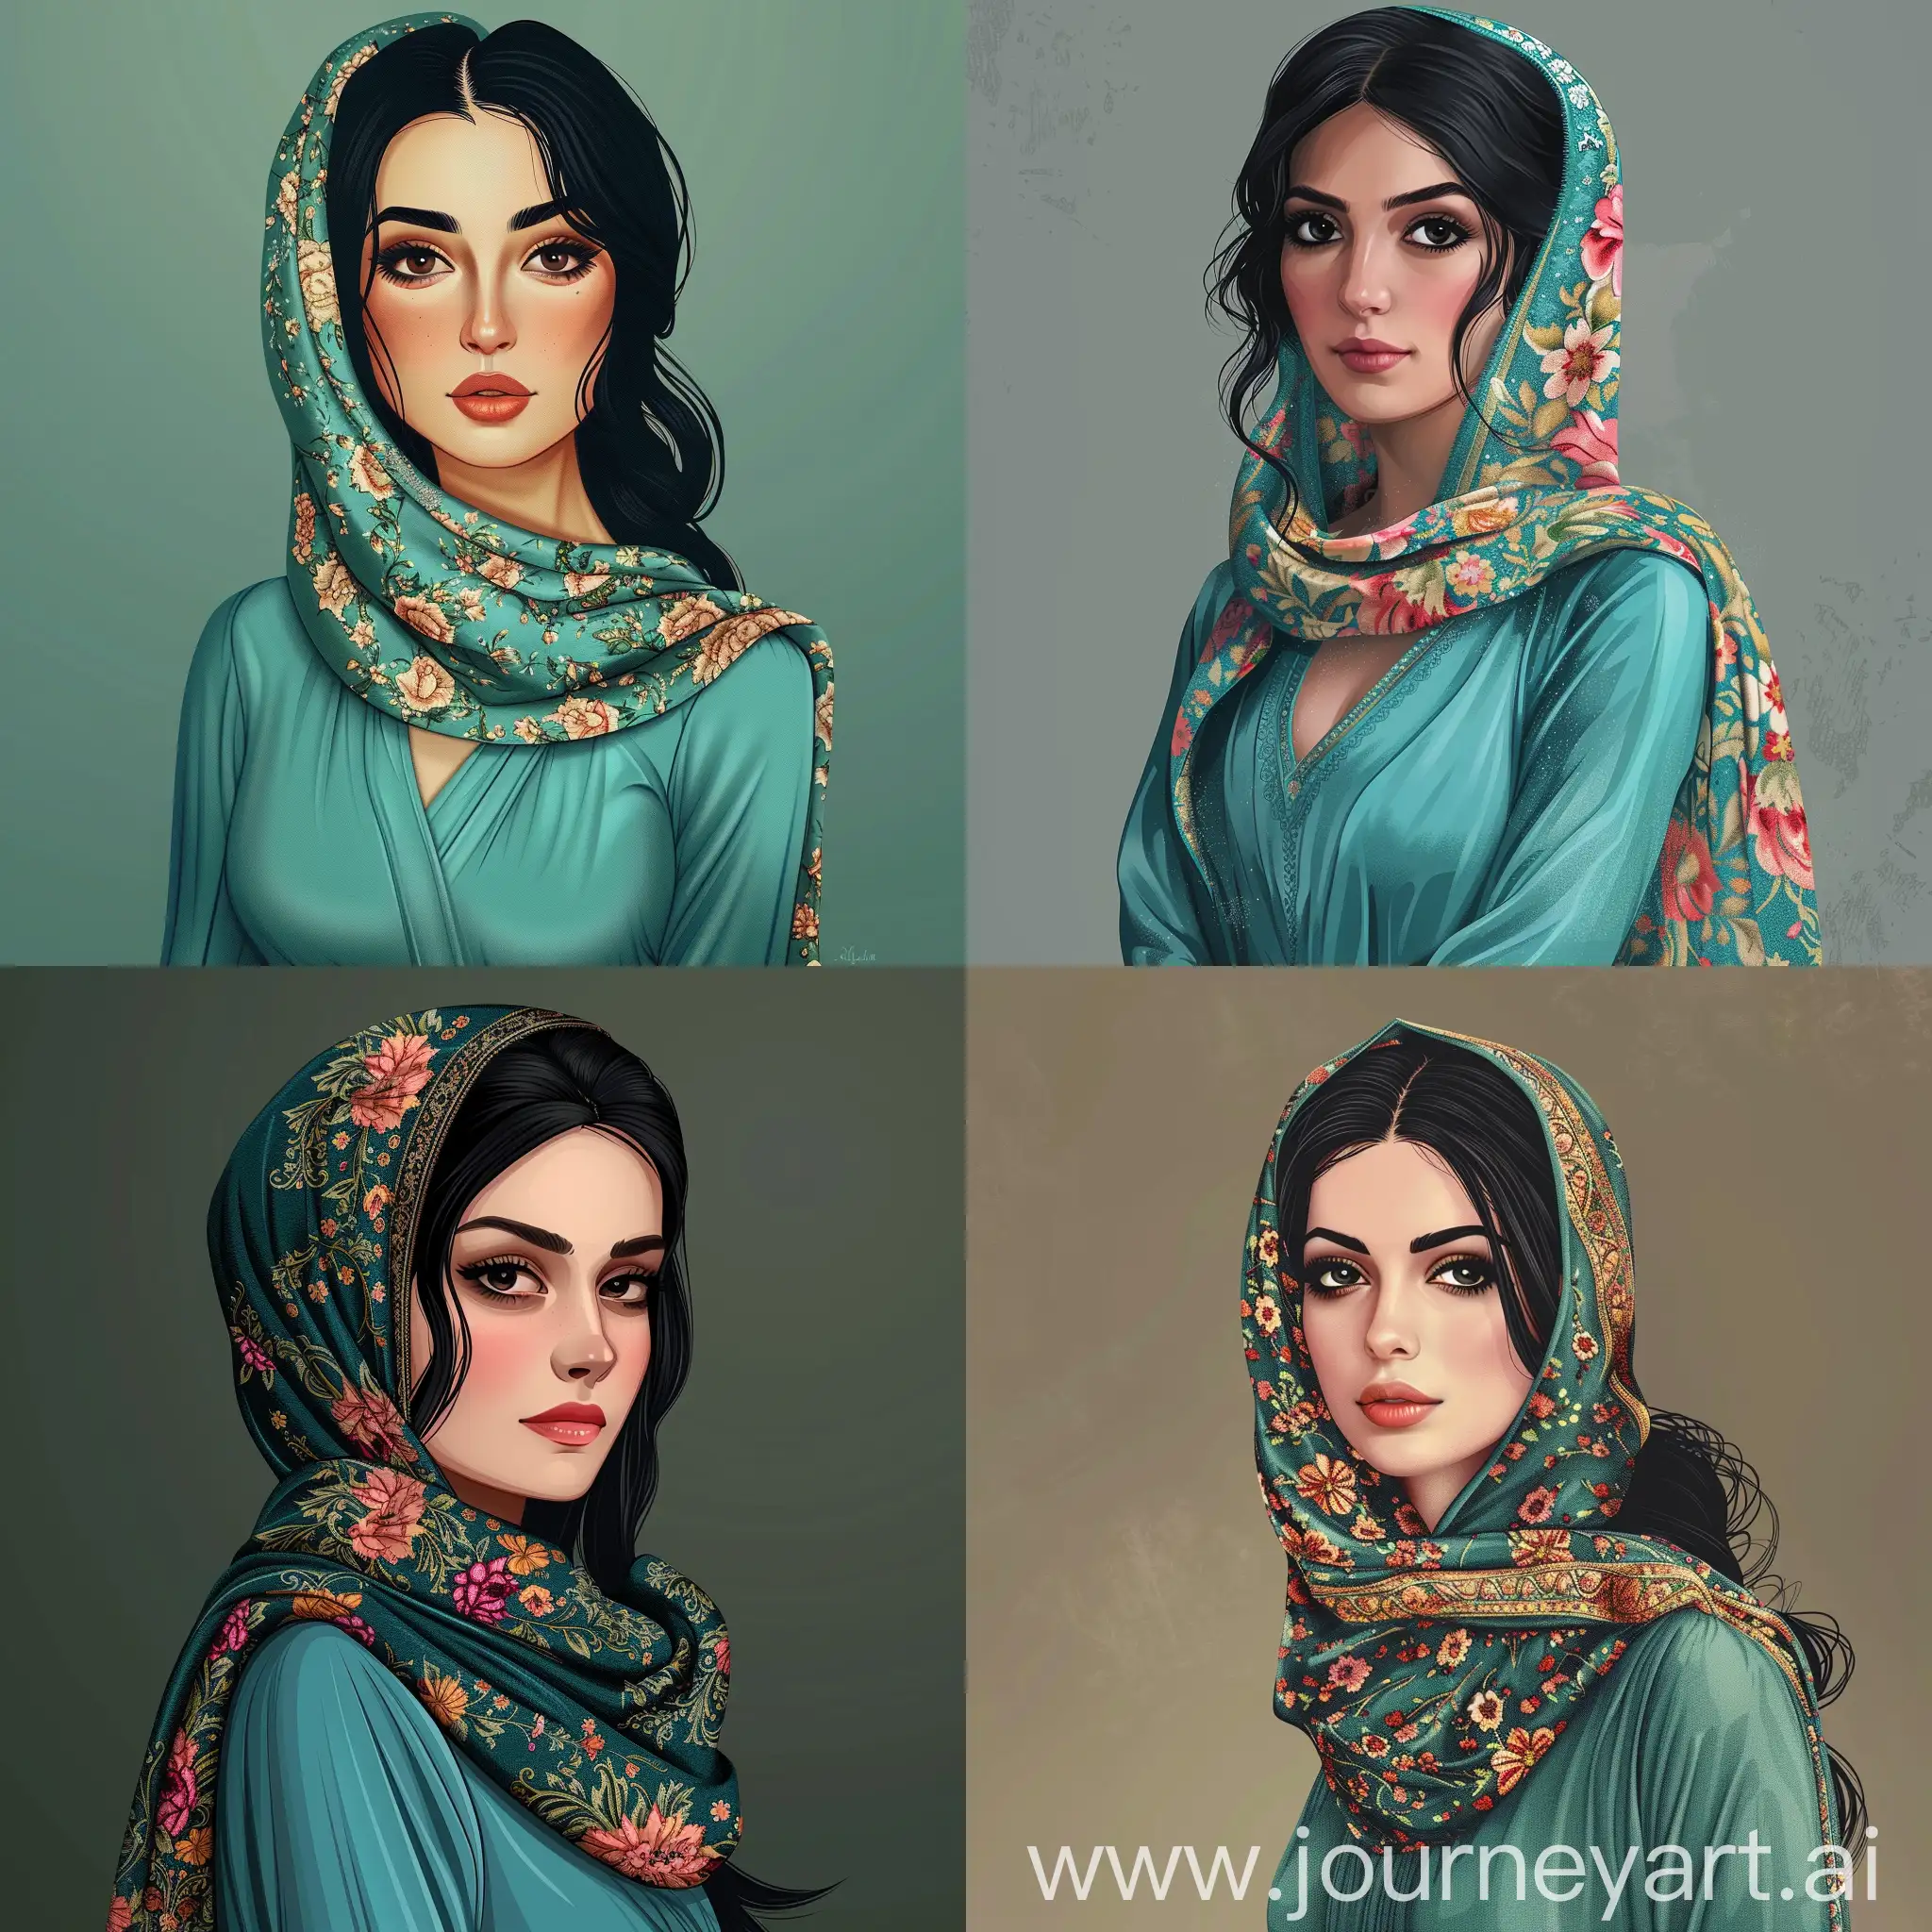 Persian-Beauty-Intricate-Vector-Art-Portrait-of-a-Woman-in-Modest-Turquoise-Dress